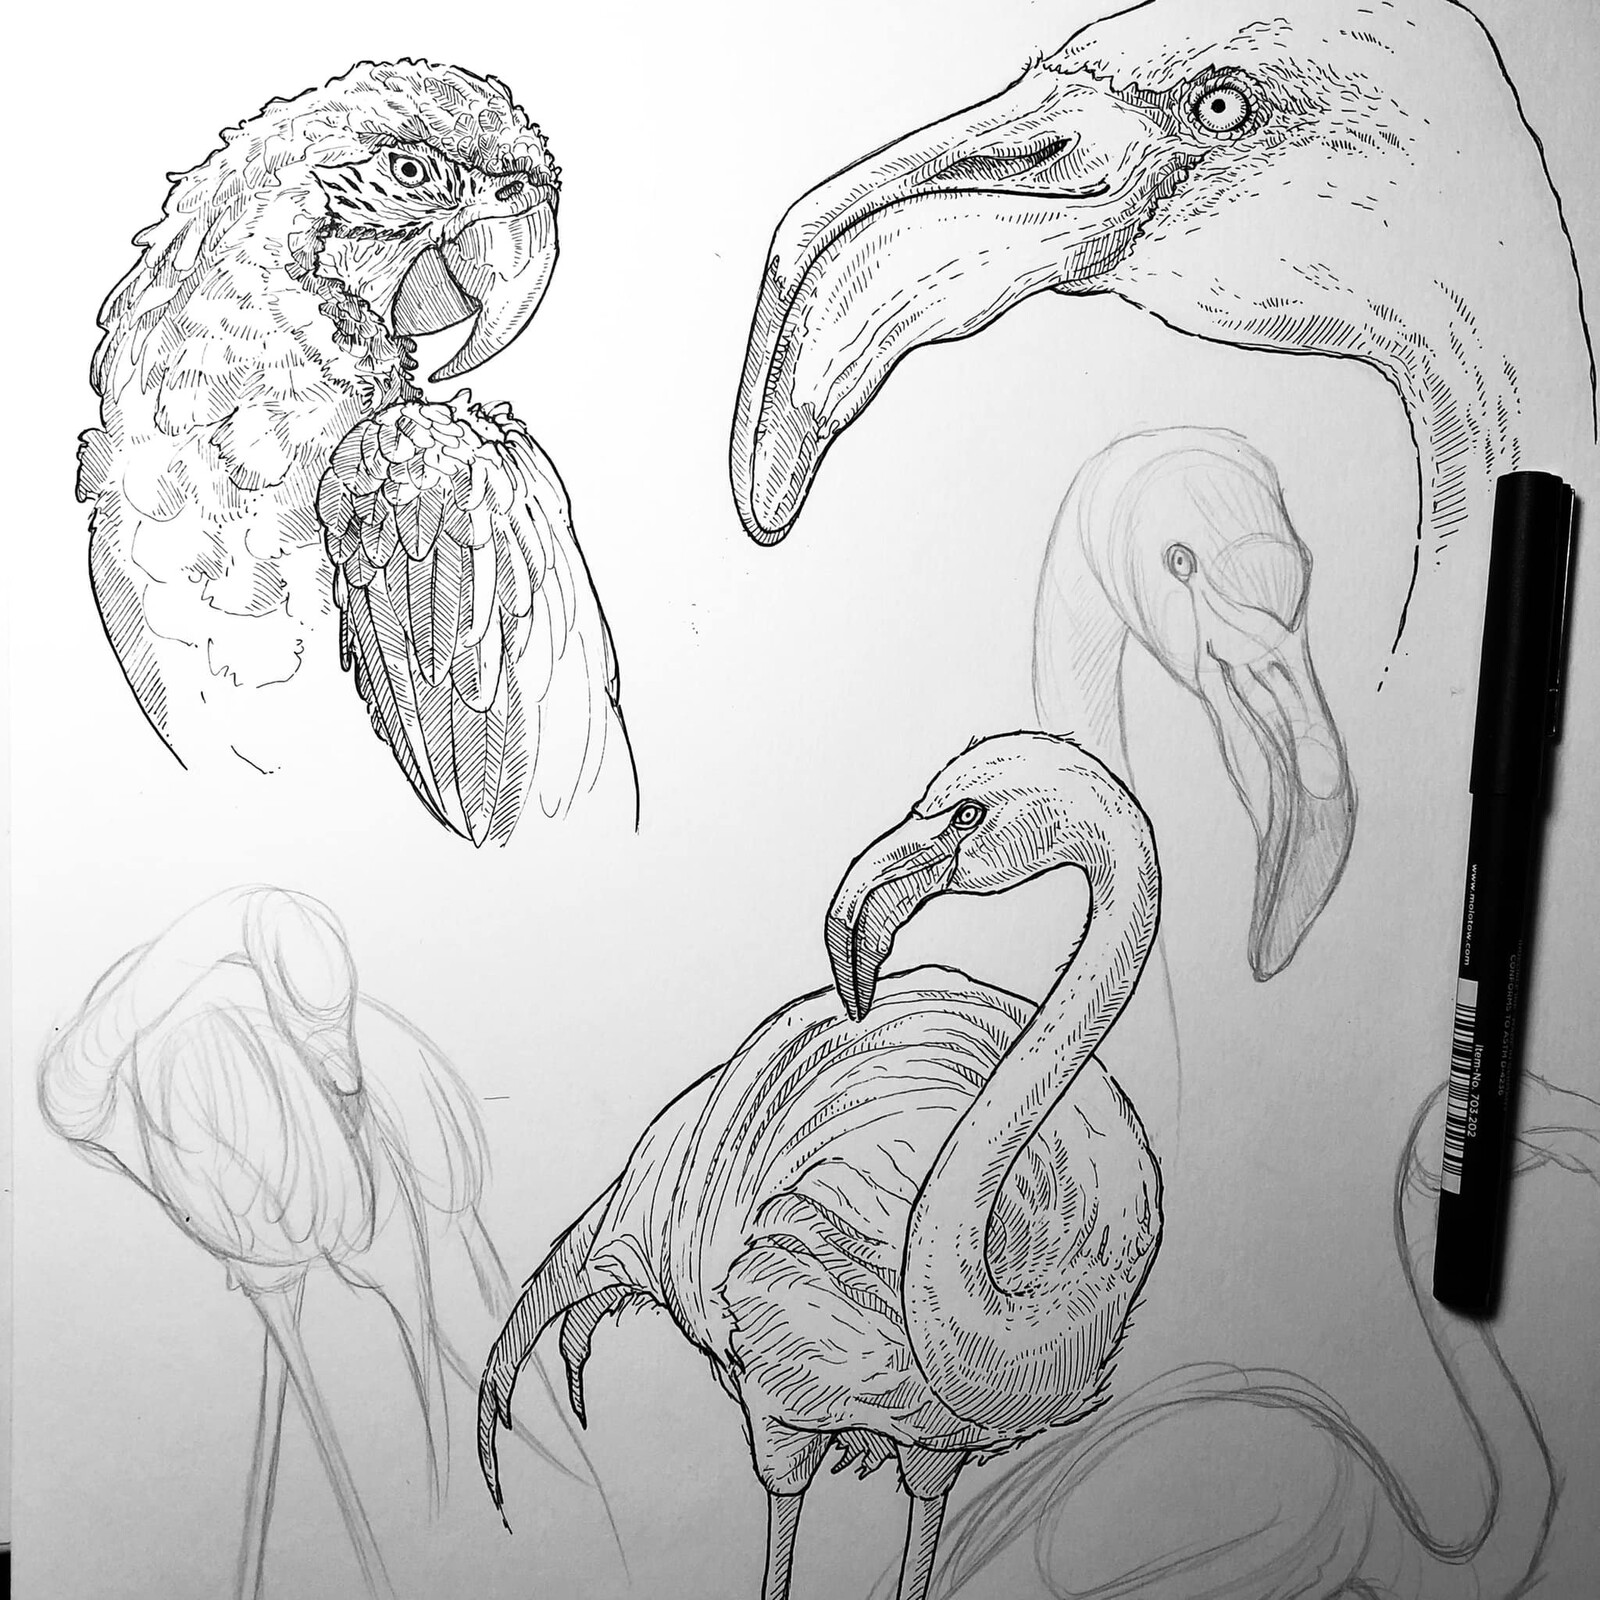 Flamingo and parrot sketches